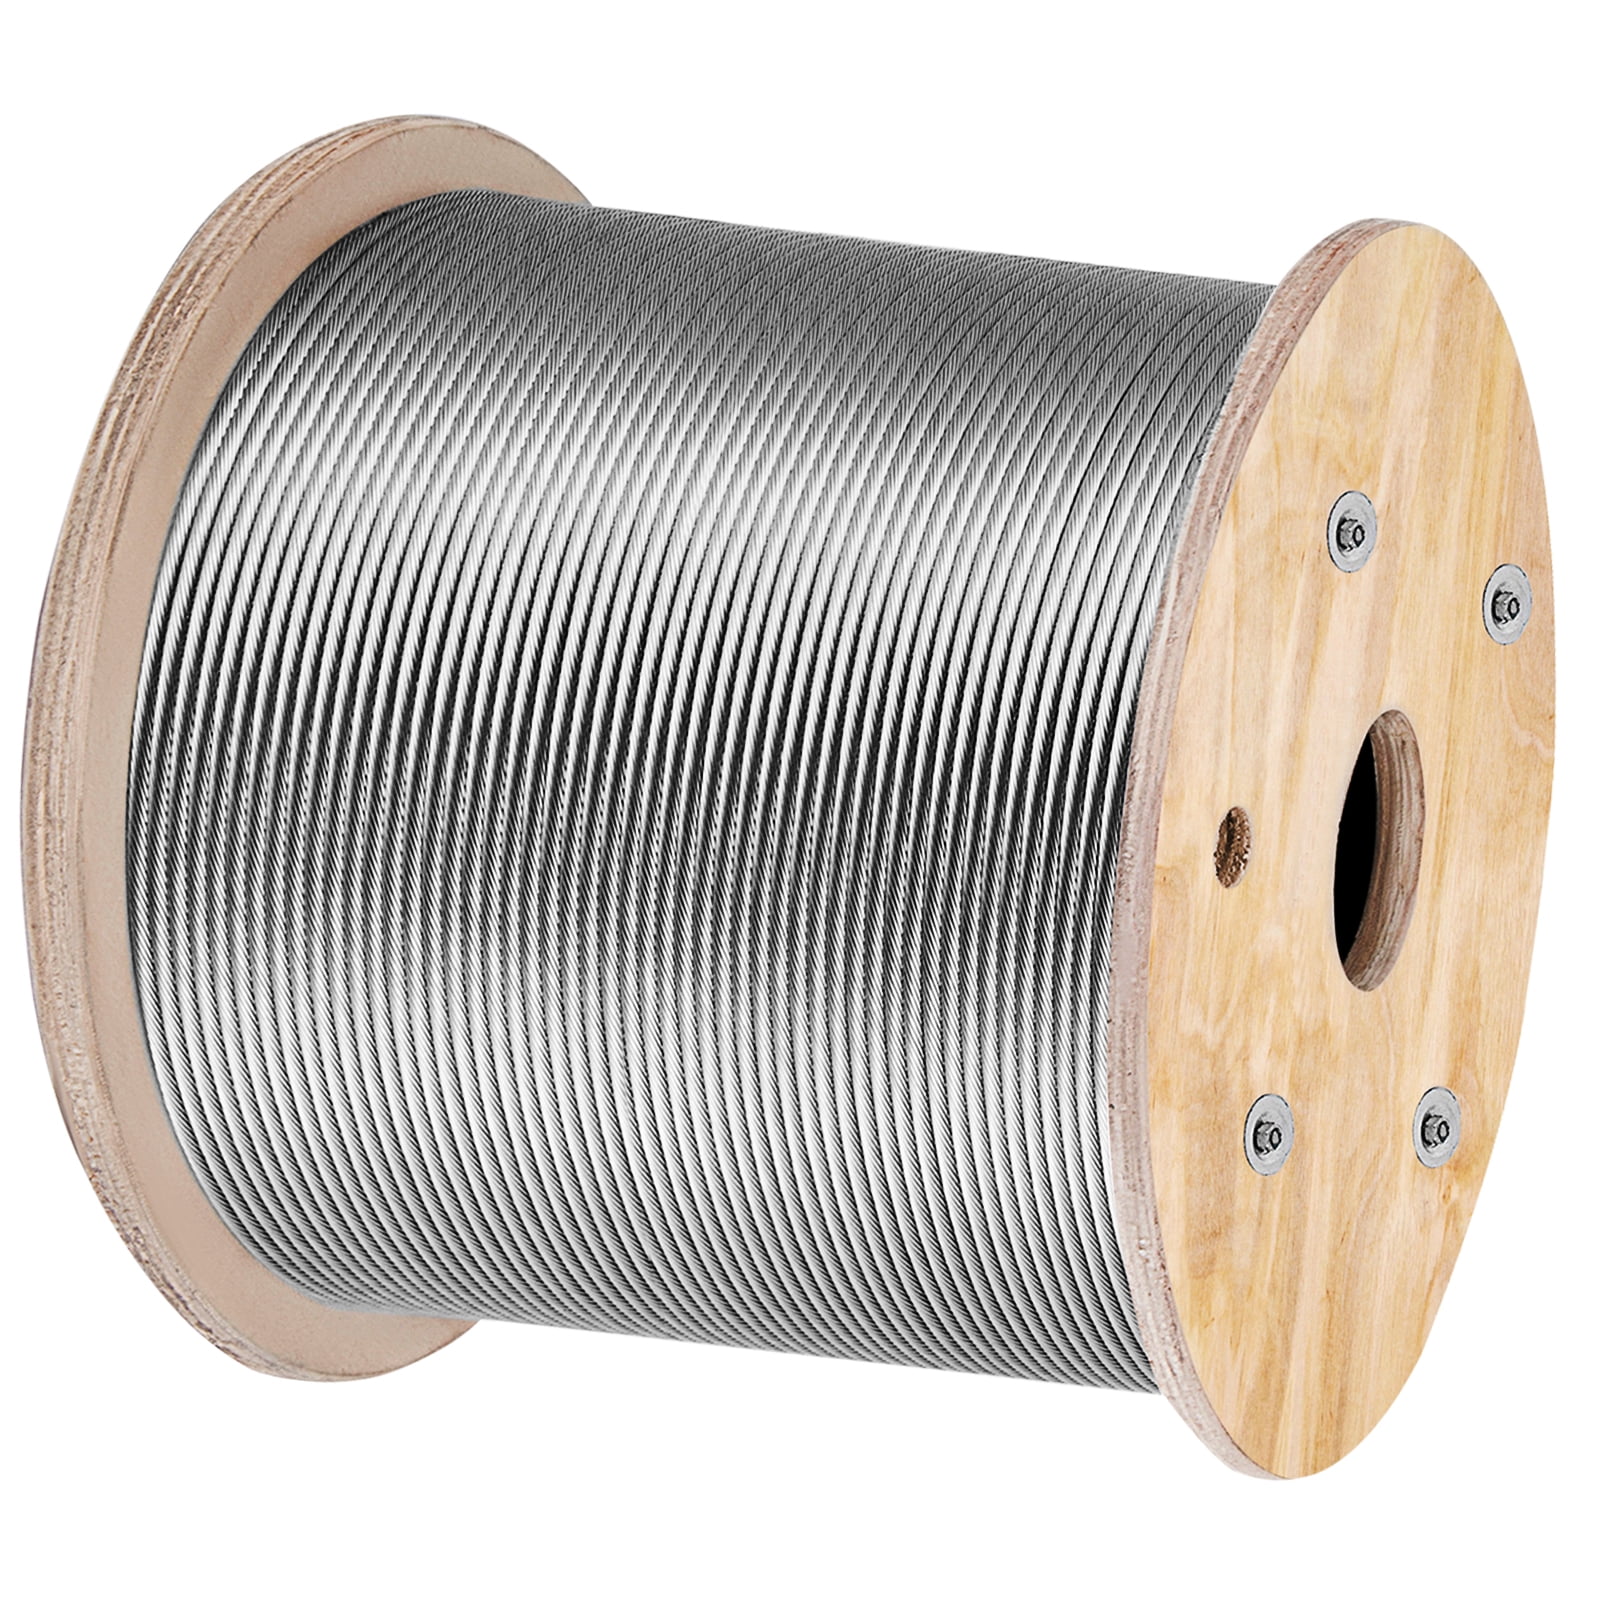 BENTISM 316 Stainless Steel Cable Wire Rope 7x7 500 FT